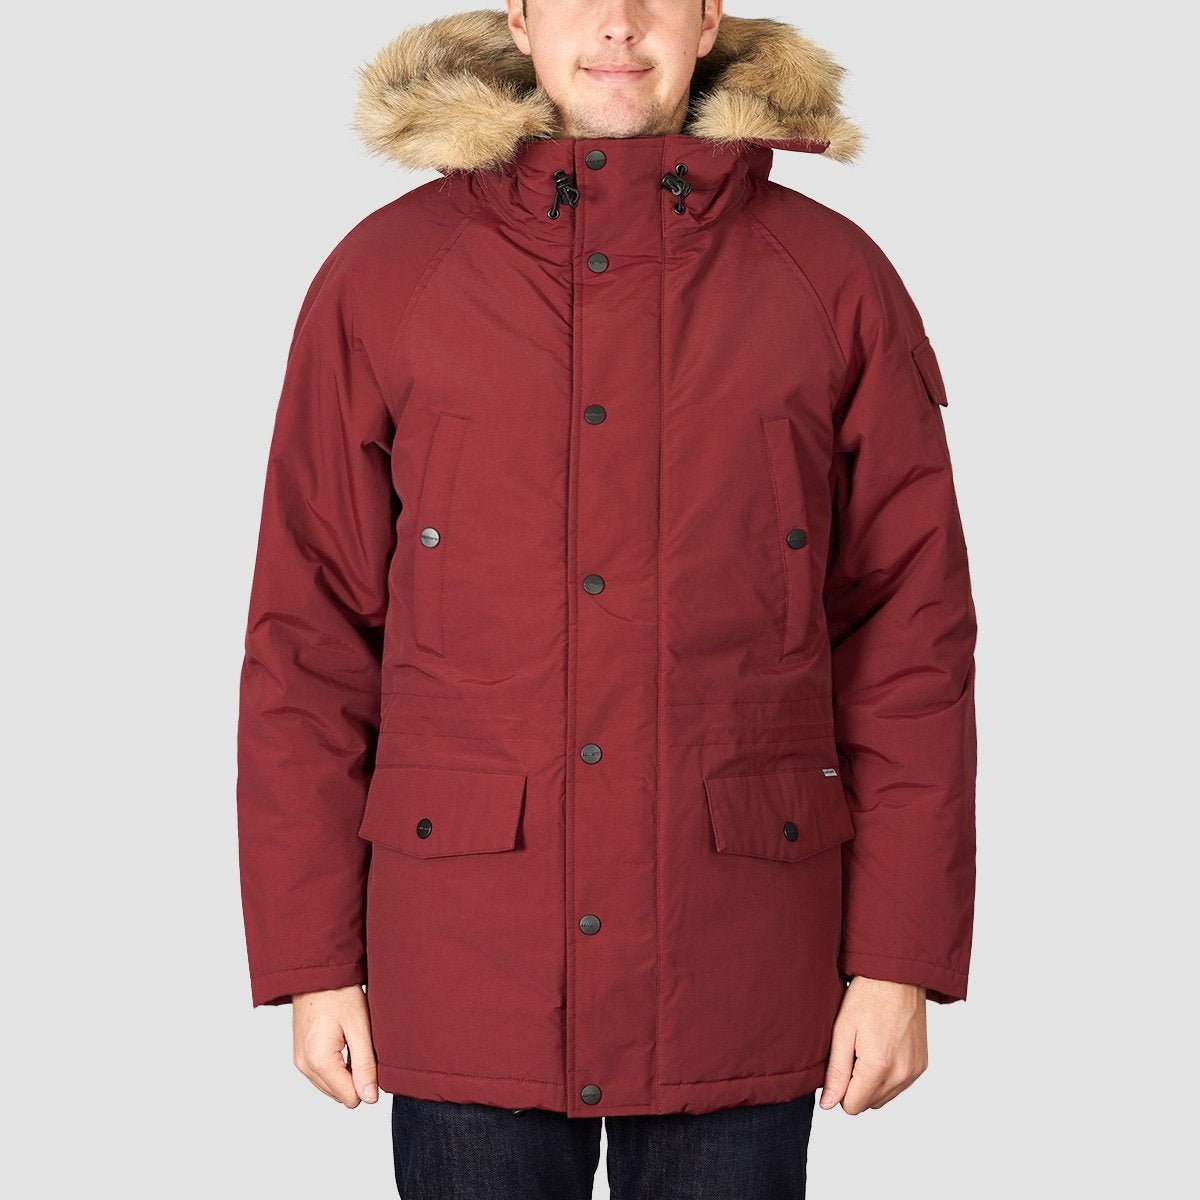 Carhartt WIP Anchorage Parka Jacket Mulberry/Black - Clothing